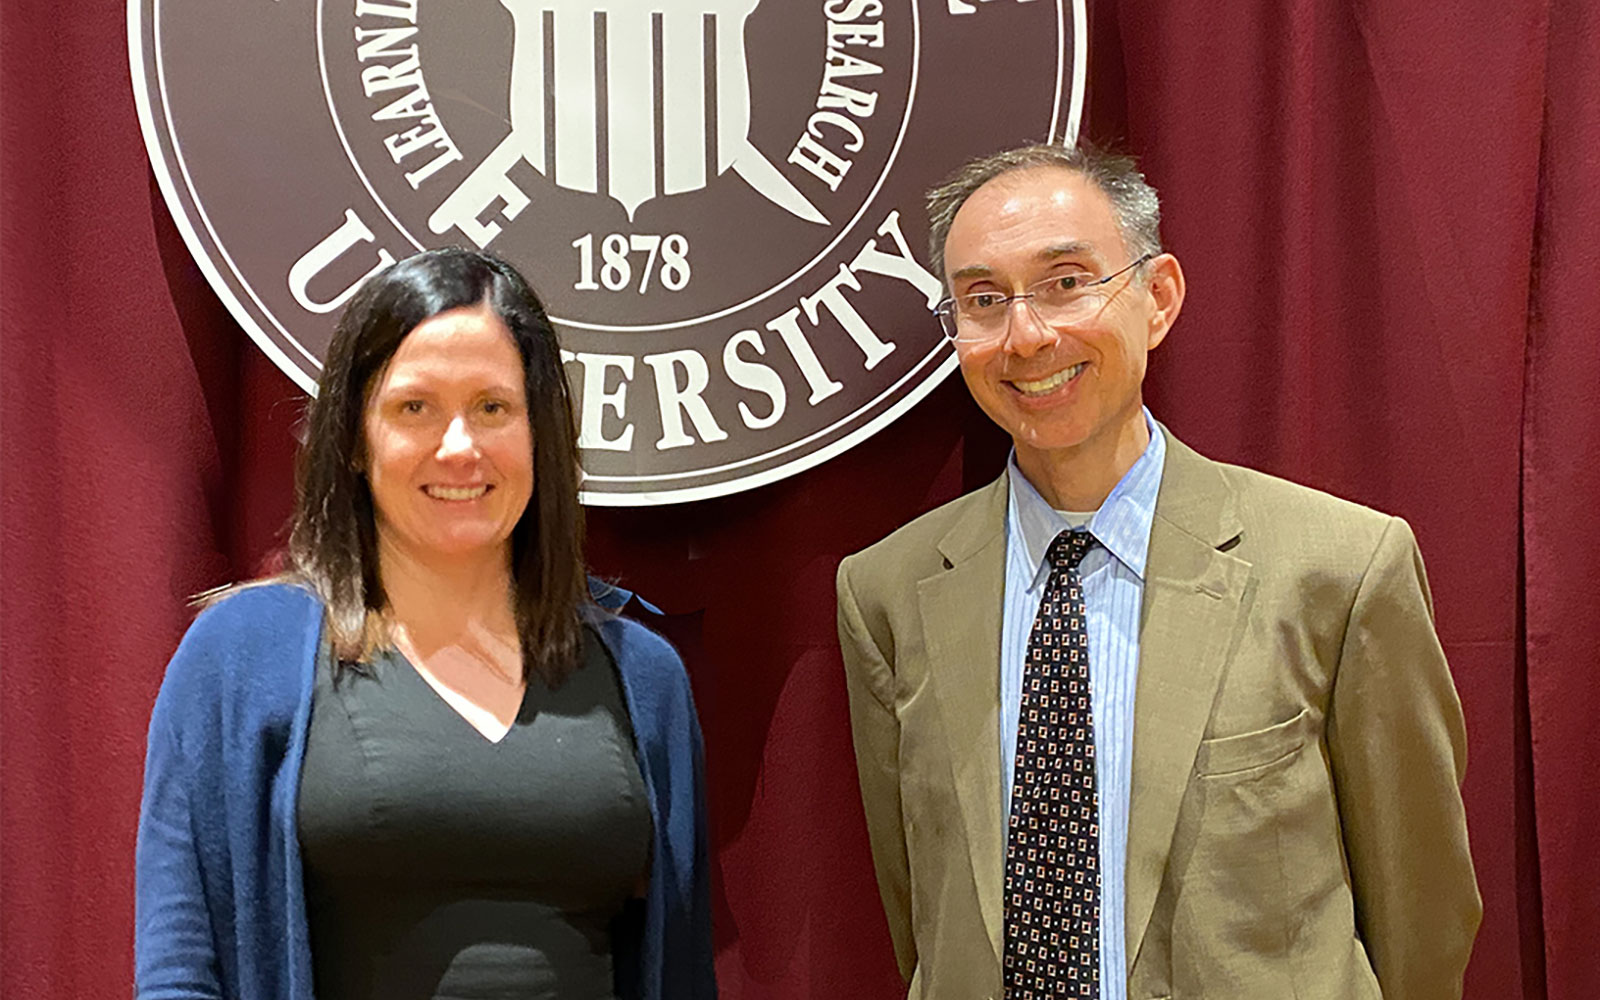 Dr. Ray Uzwyshyn stands with Dr. Lis Pankl in front of a maroon drape background with the MSU seal.